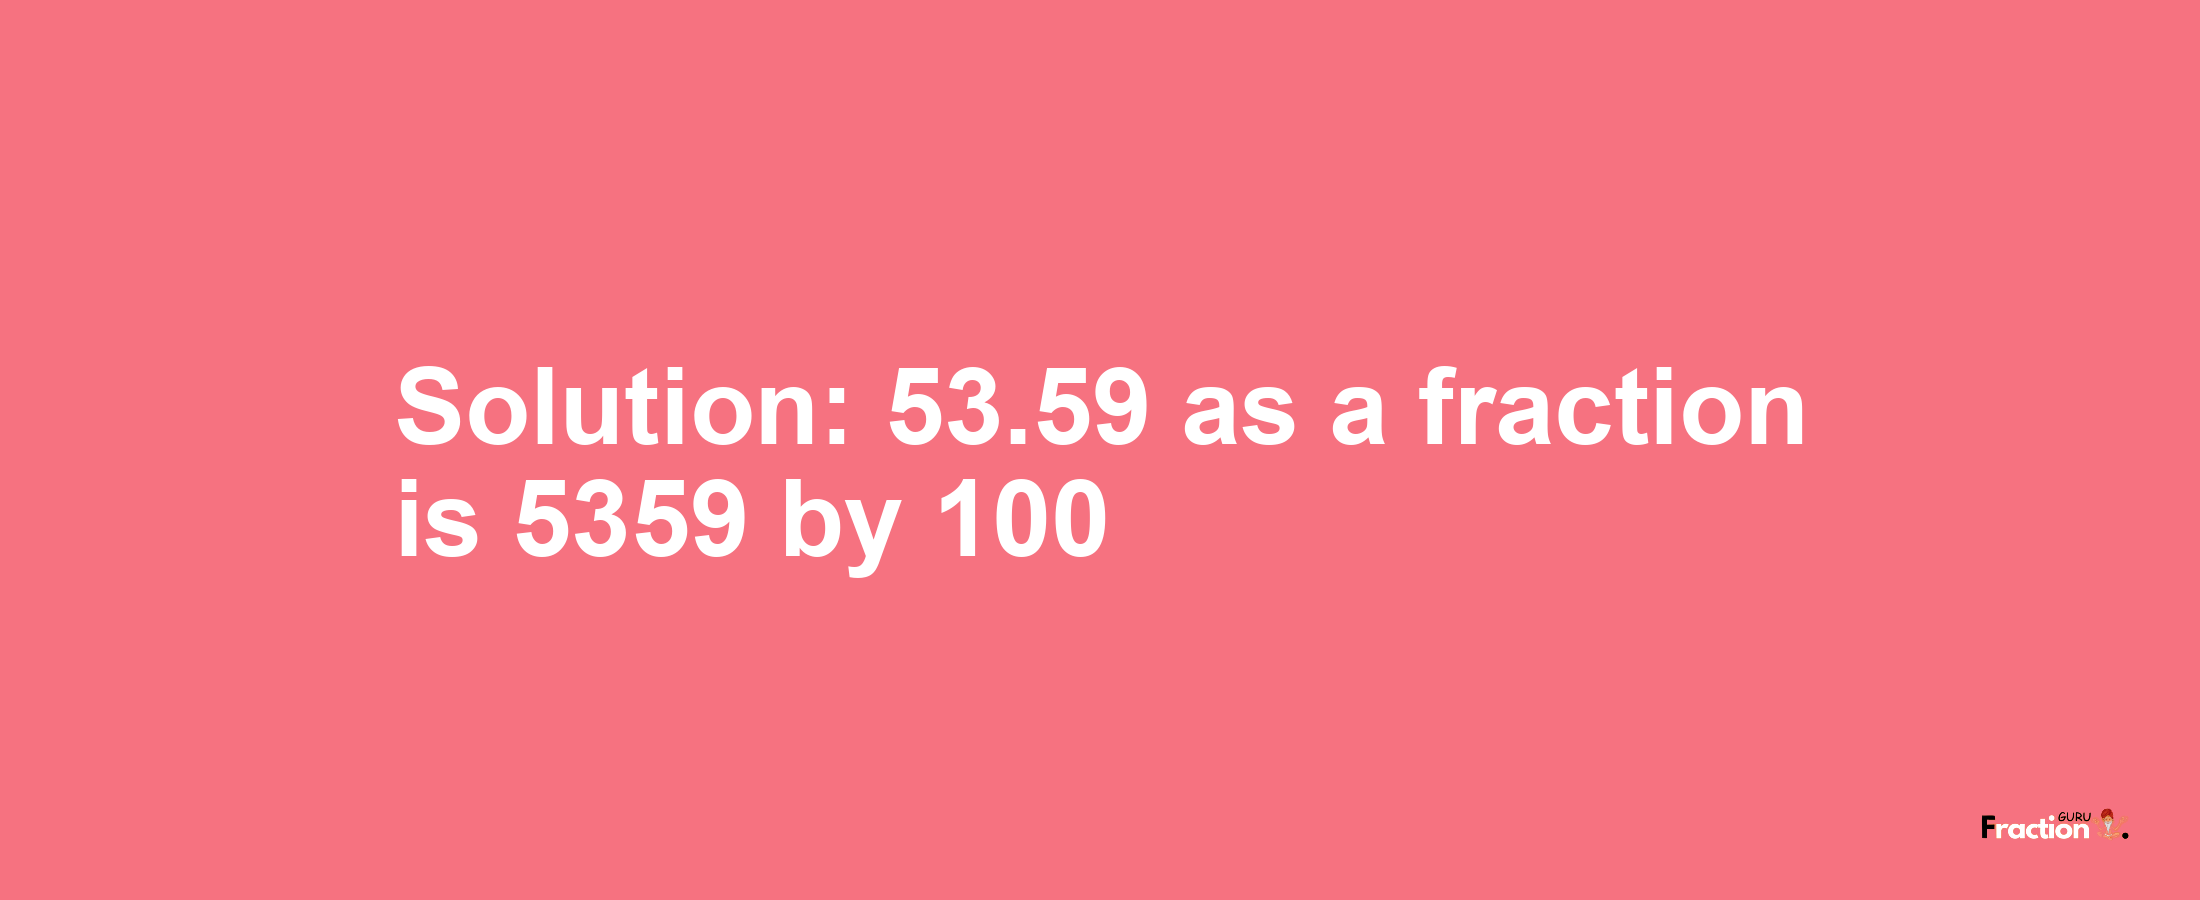 Solution:53.59 as a fraction is 5359/100